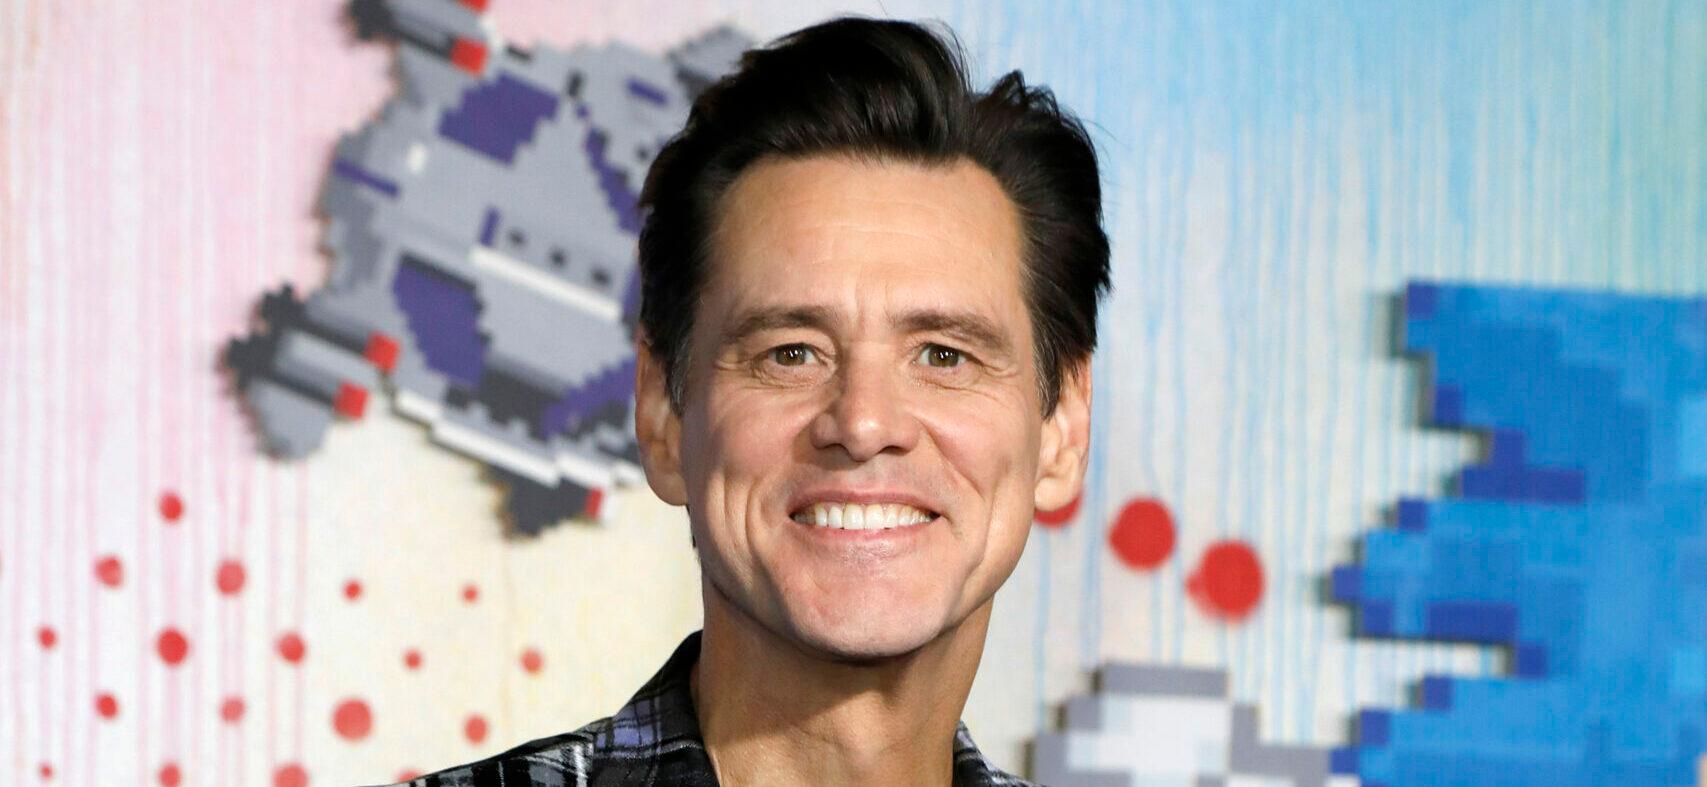 LOS ANGELES - FEB 12: Jim Carrey at the "Sonic The Hedgehog" Special Screening at the Village Theater on February 12, 2020 in Westwood, CA Newscom/(Mega Agency TagID: khphotos787714.jpg) [Photo via Mega Agency]